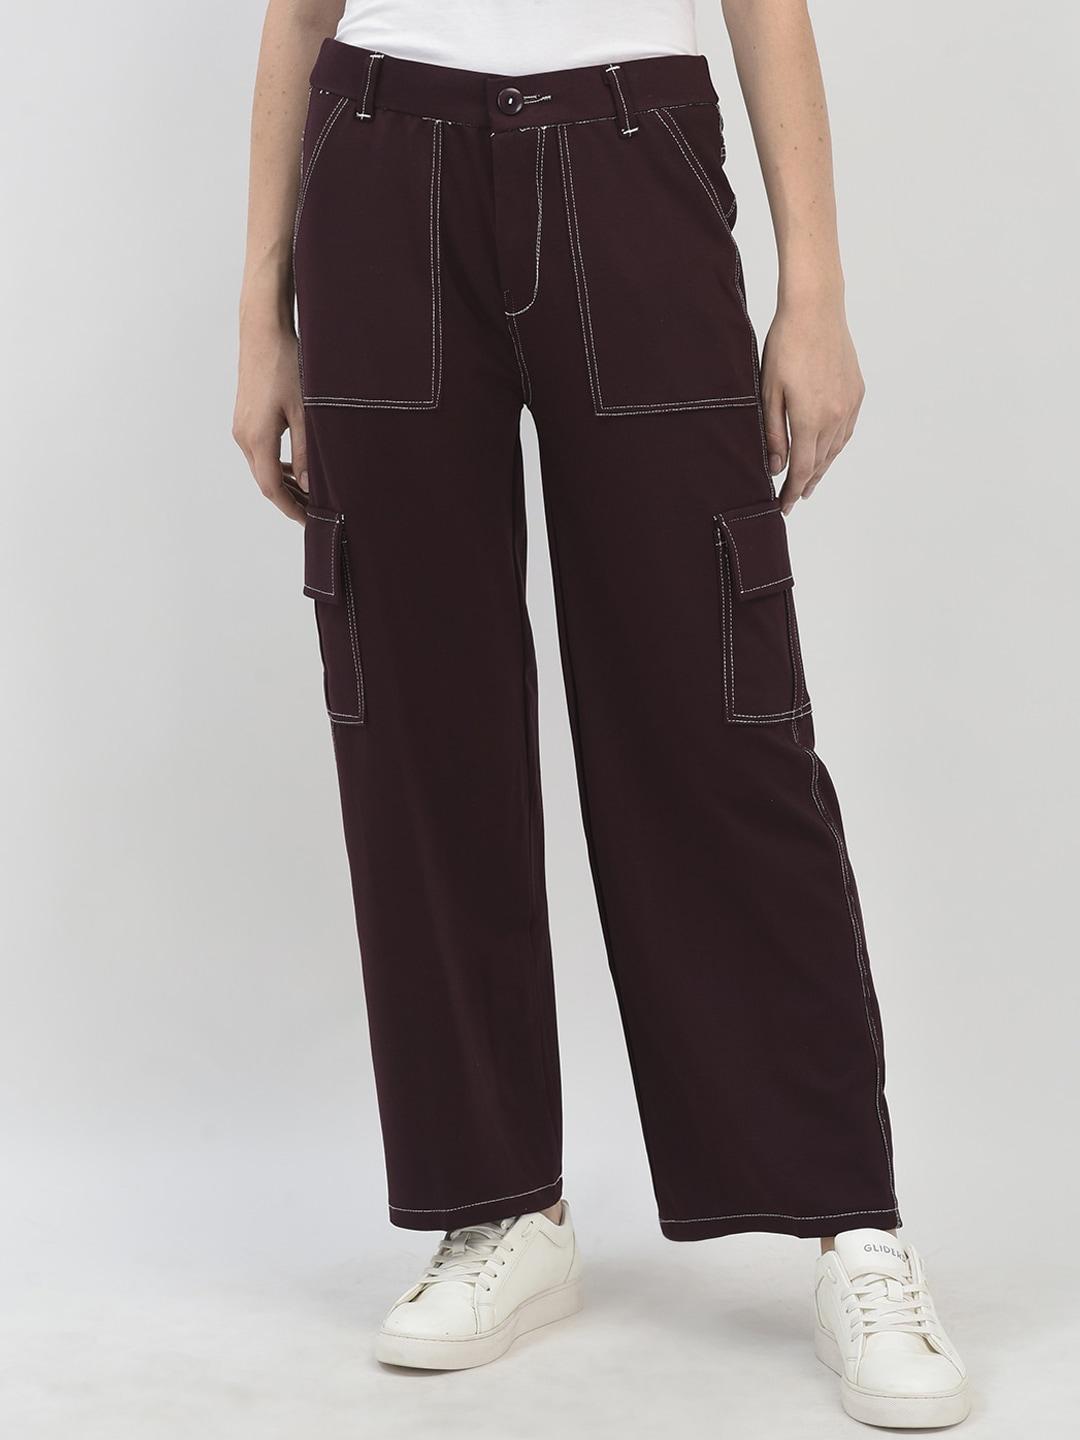 fnocks-women-cotton-comfort-loose-fit-cargos-trousers